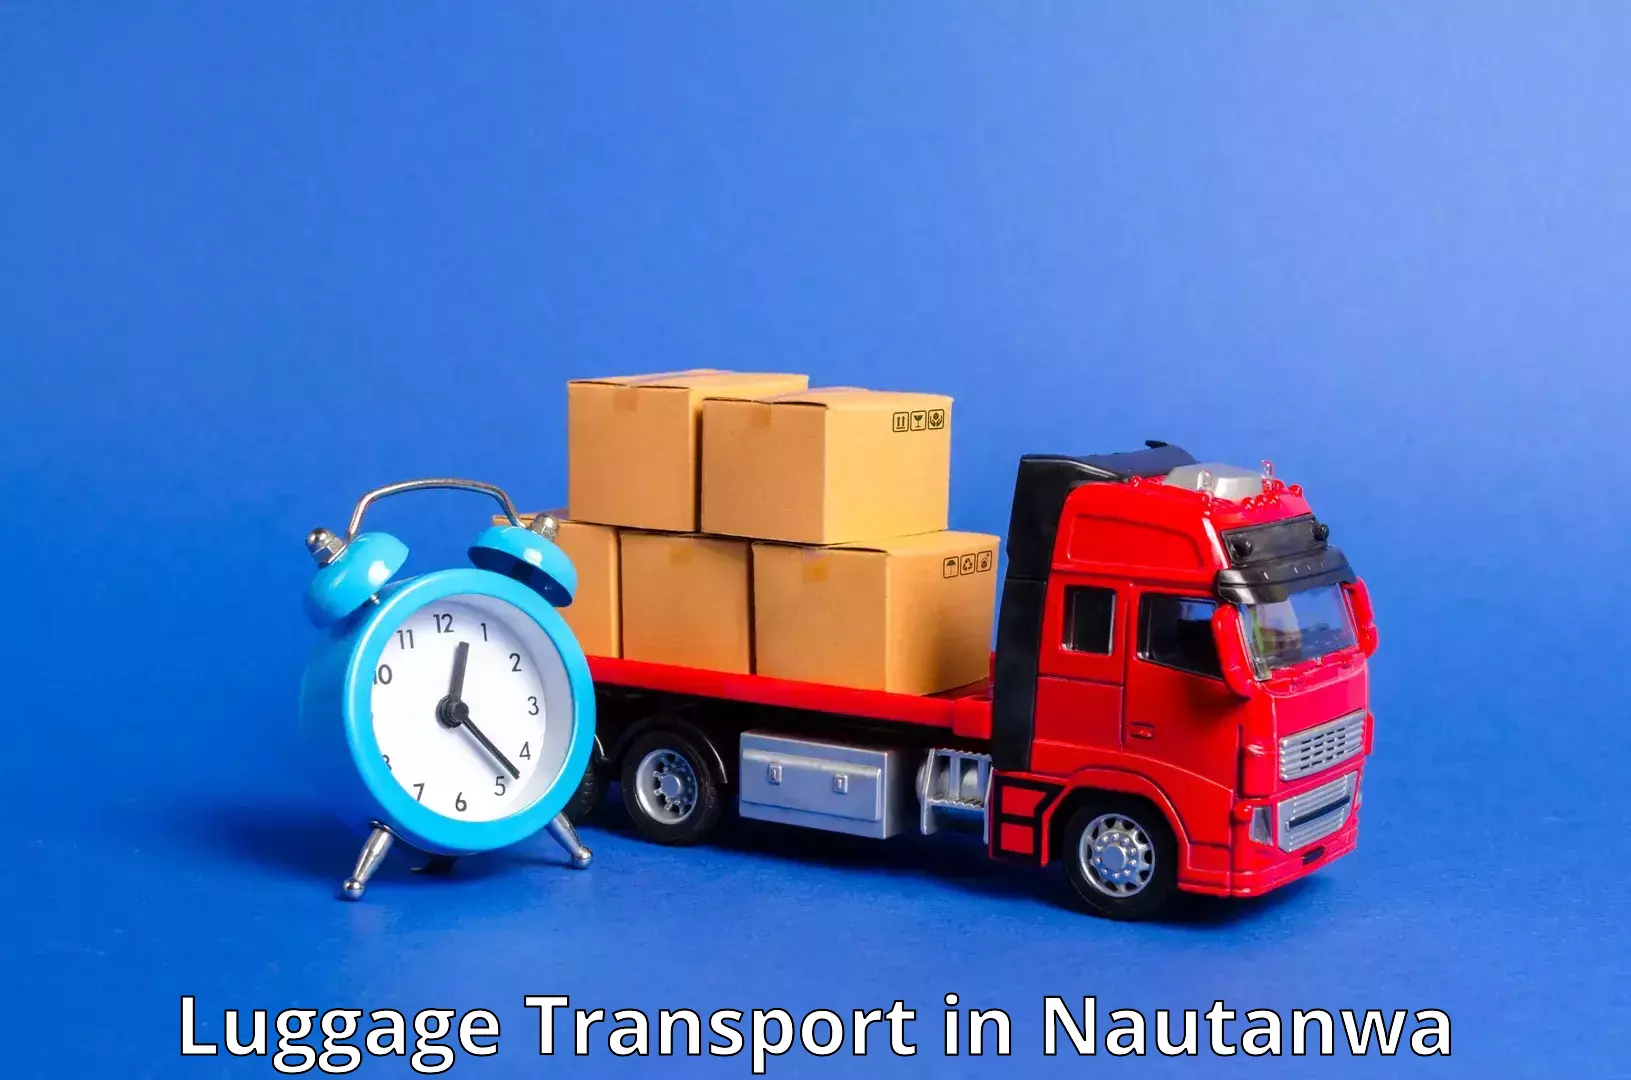 Luggage delivery system in Nautanwa